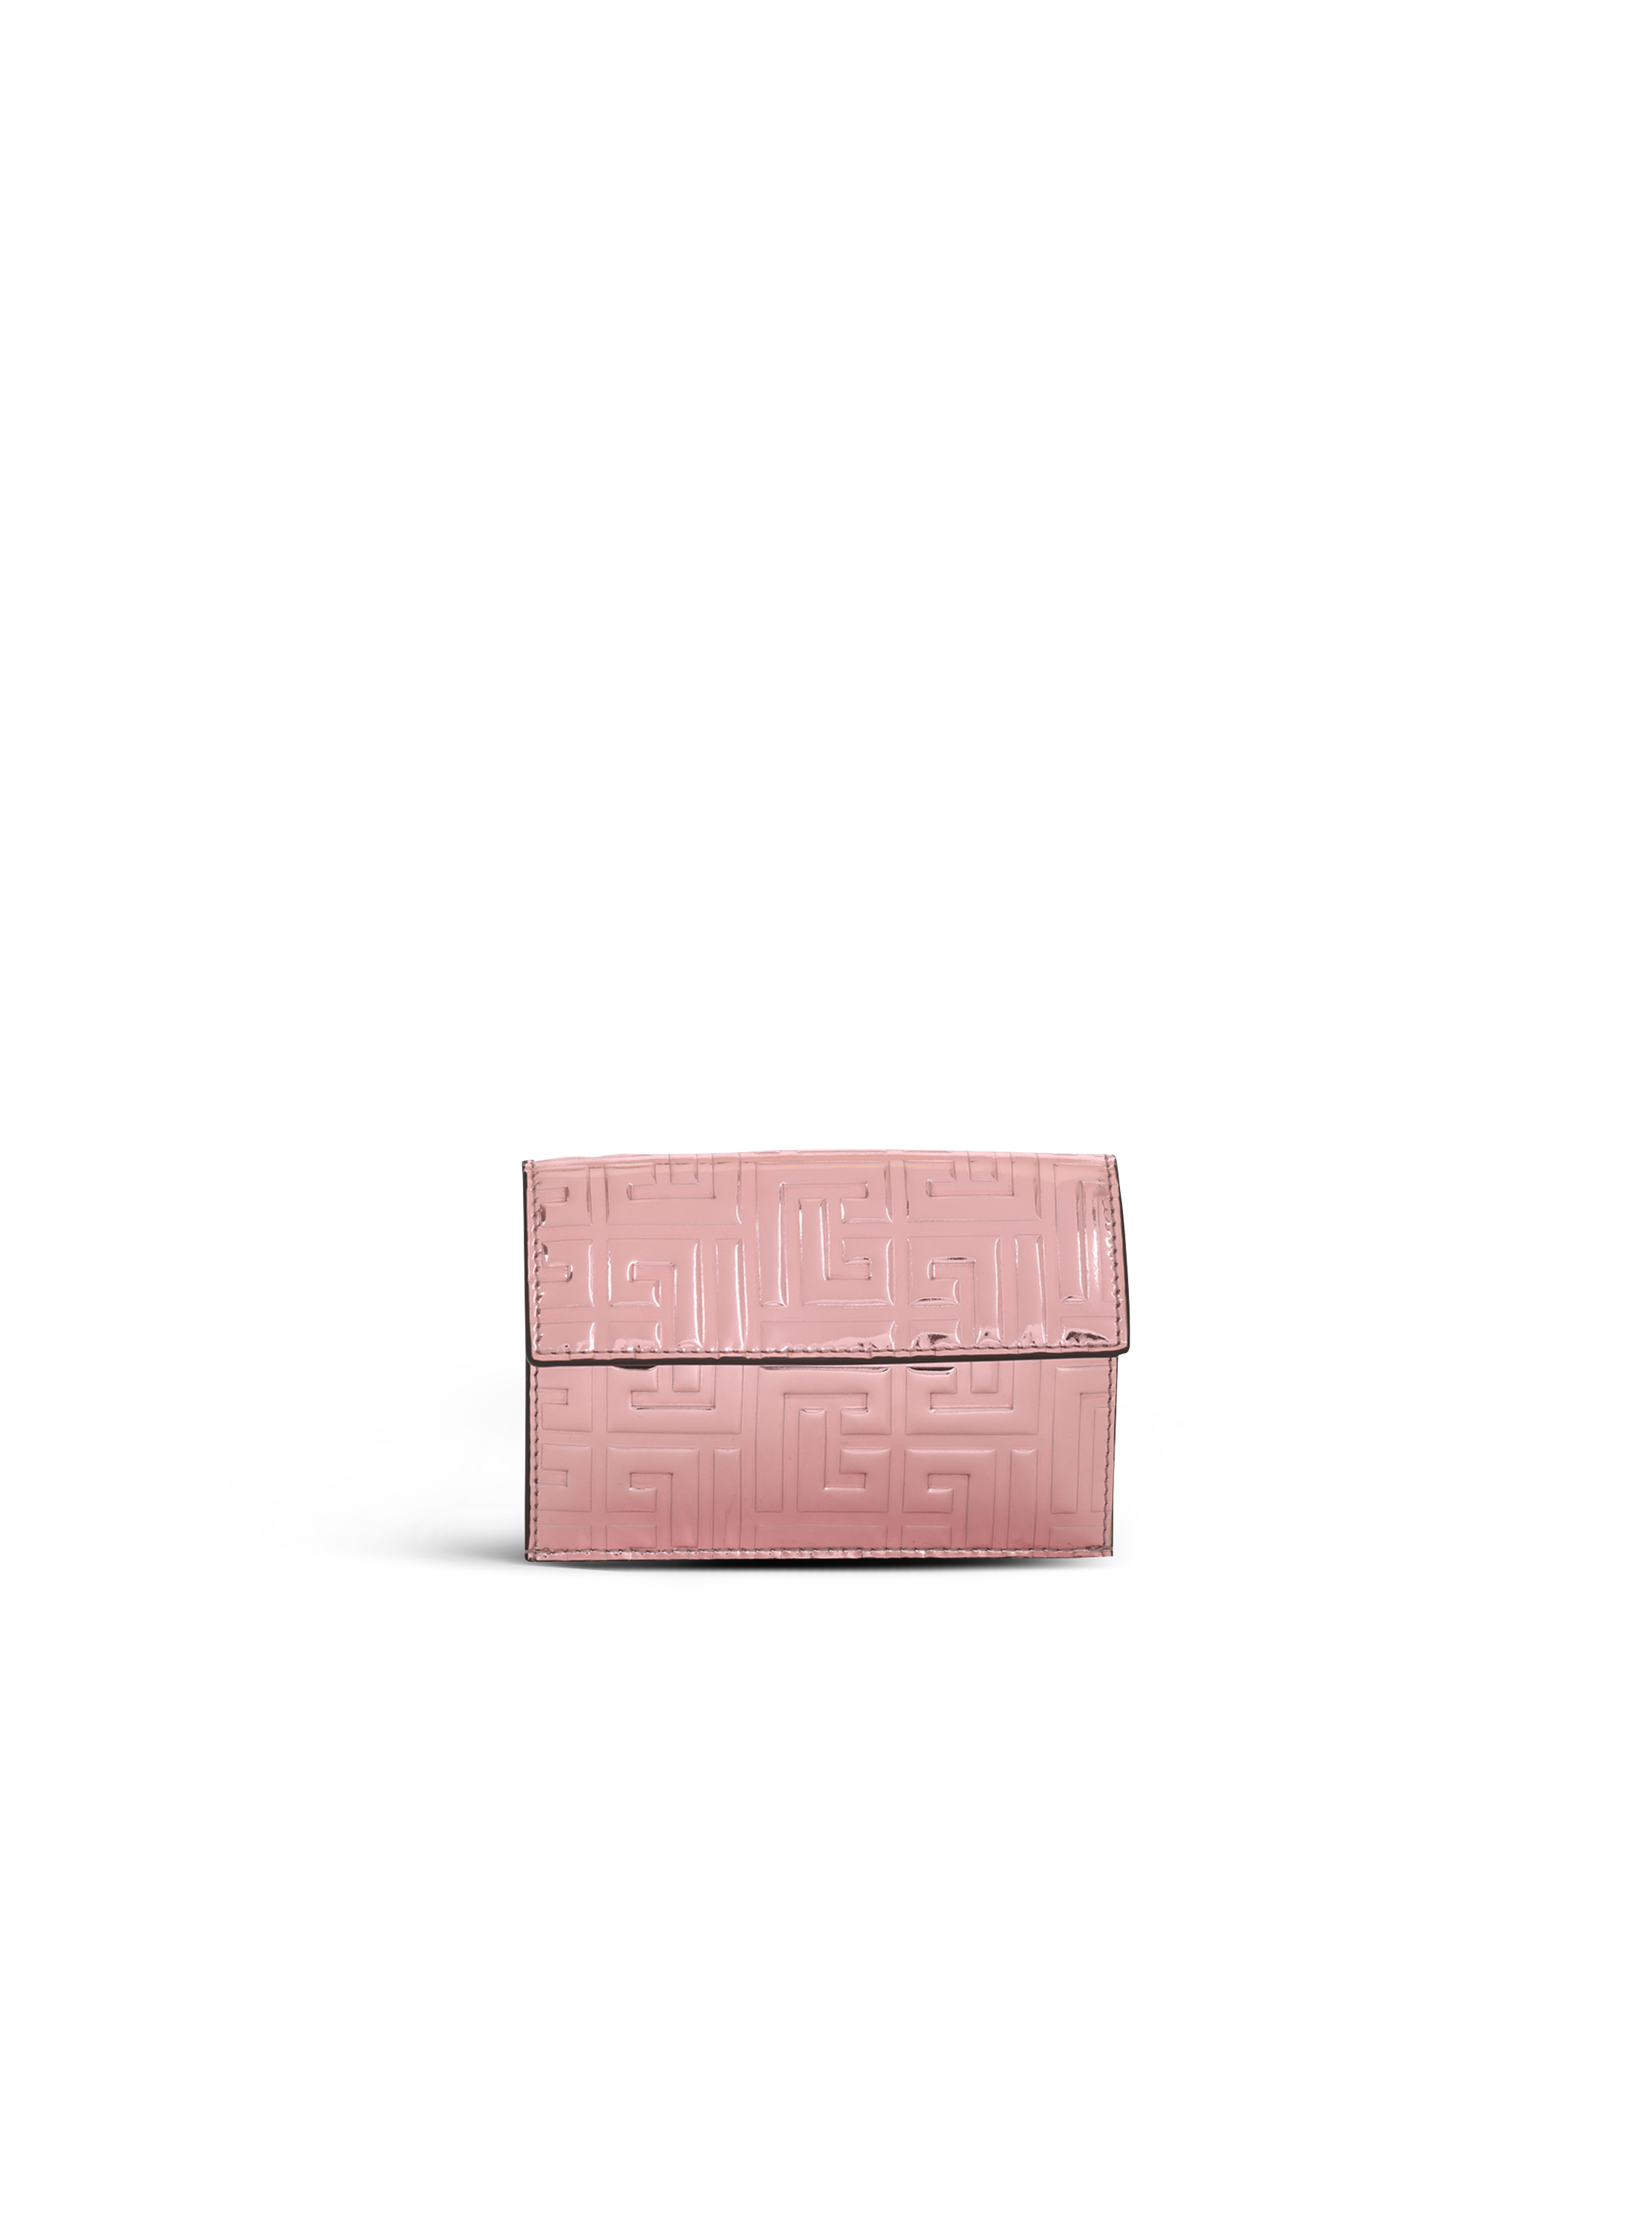 Debossed mirror-shine leather coin pouch with Balmain monogram, pink